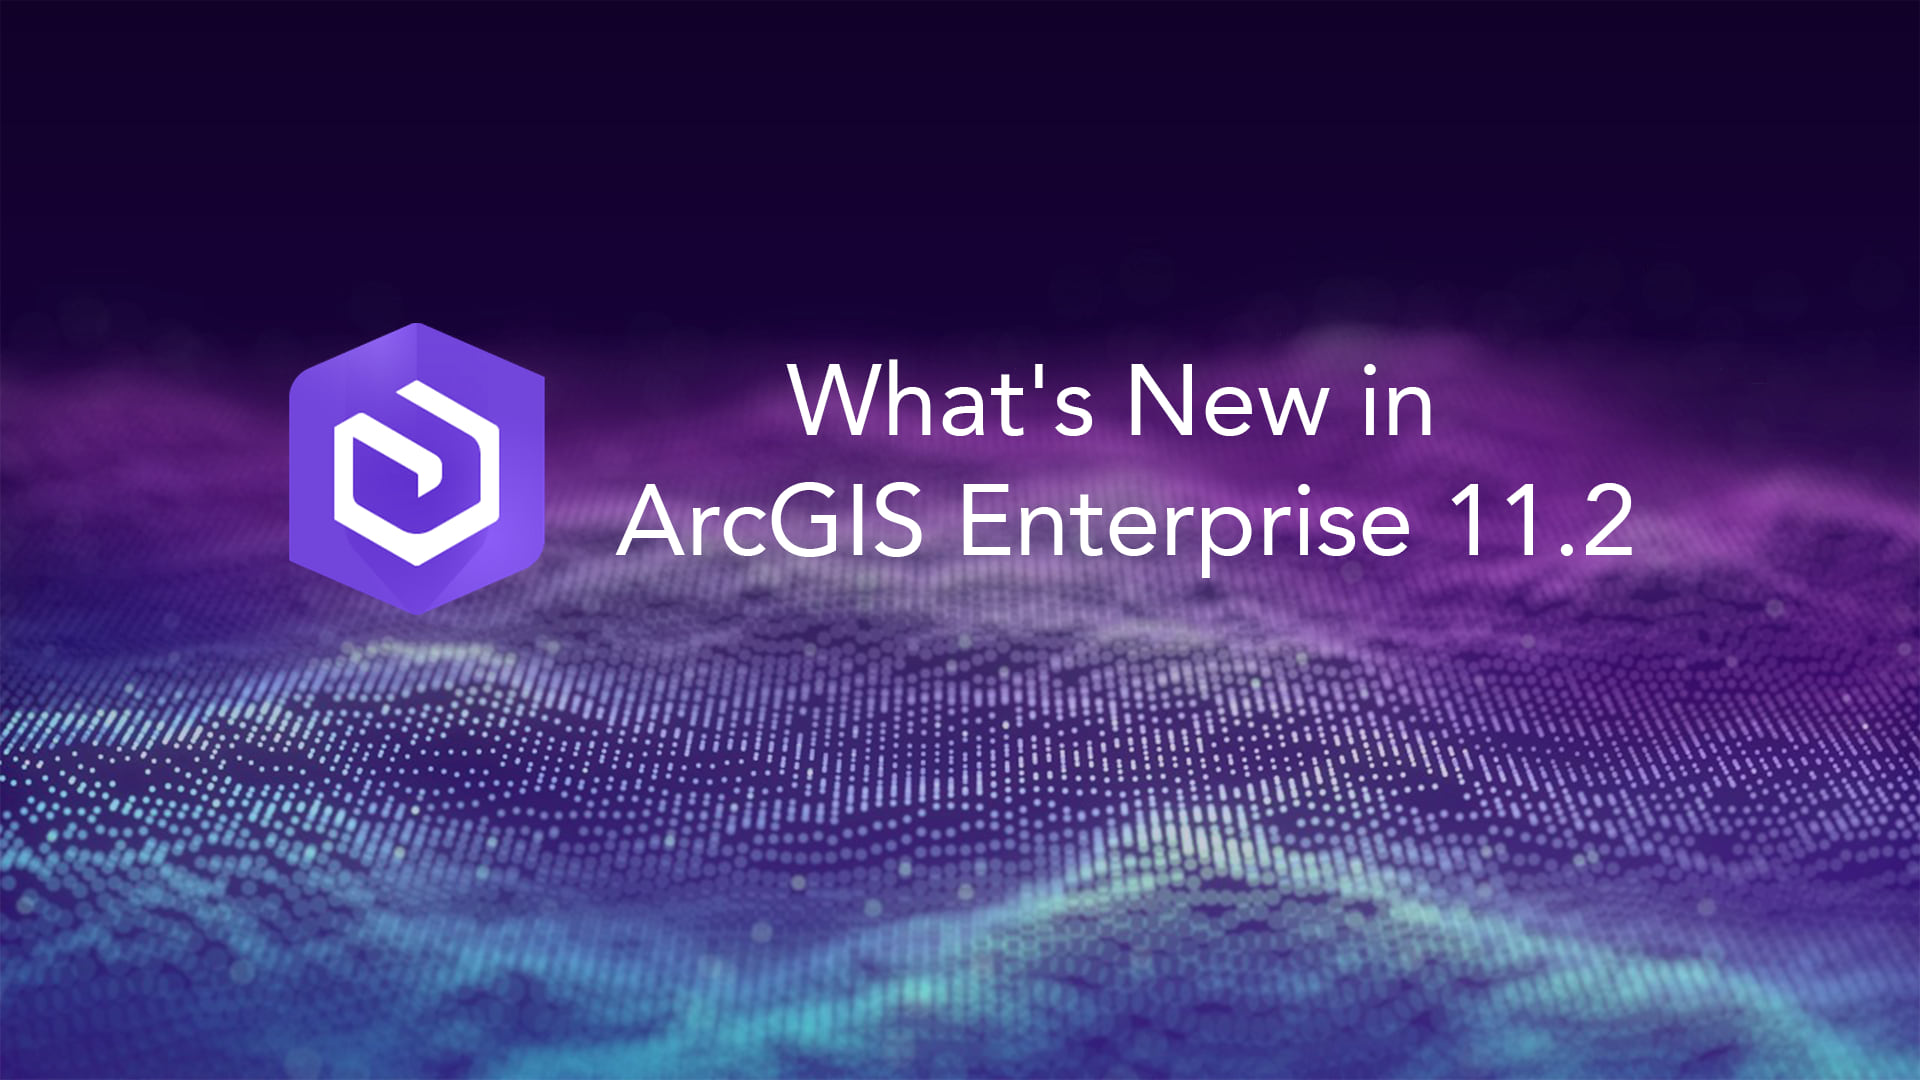 What's New in ArcGIS Enterprise 11.2